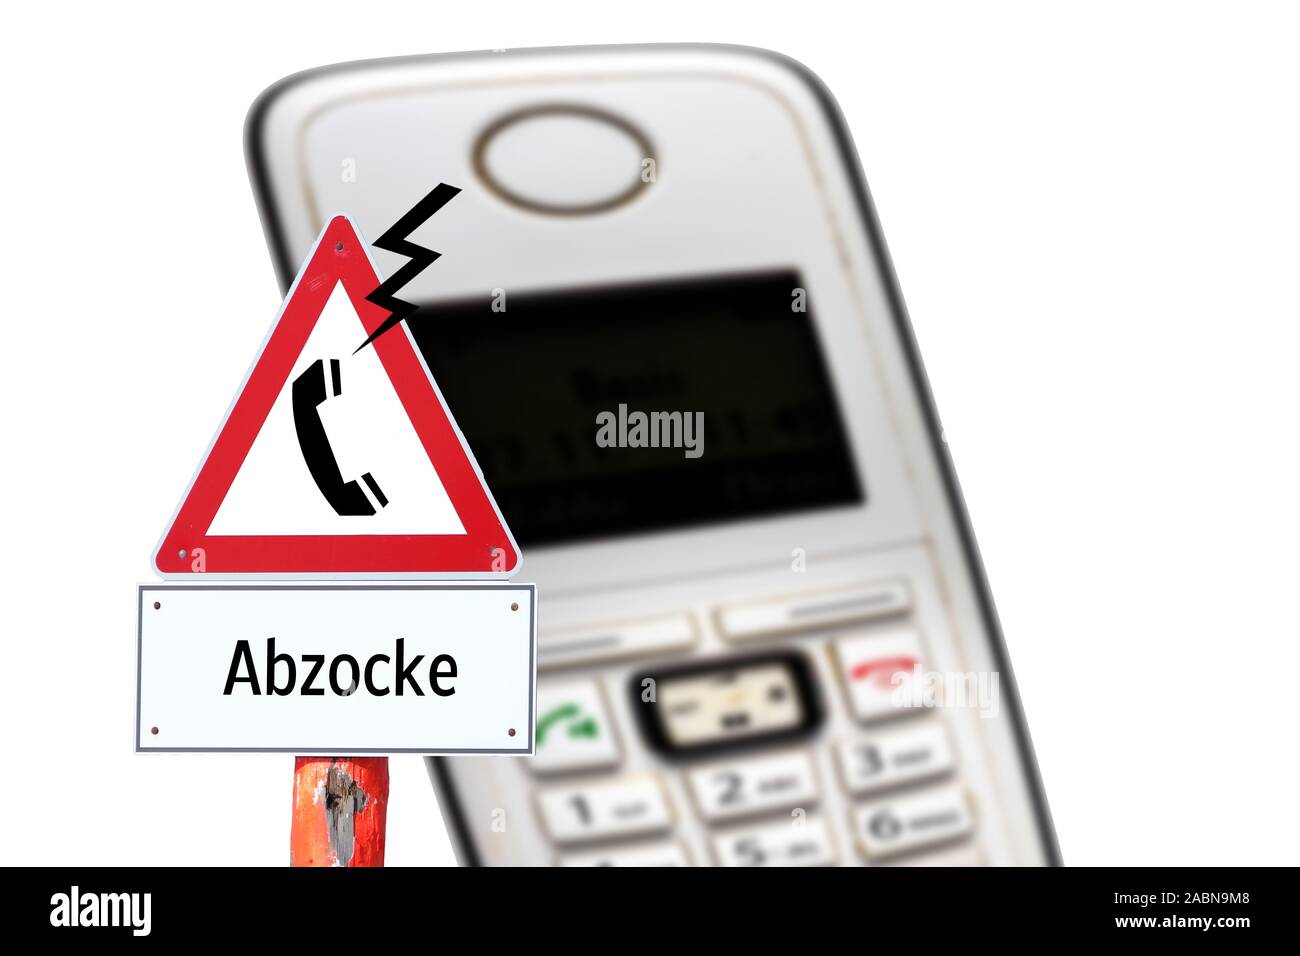 Warning sign rip off the phone in german Stock Photo